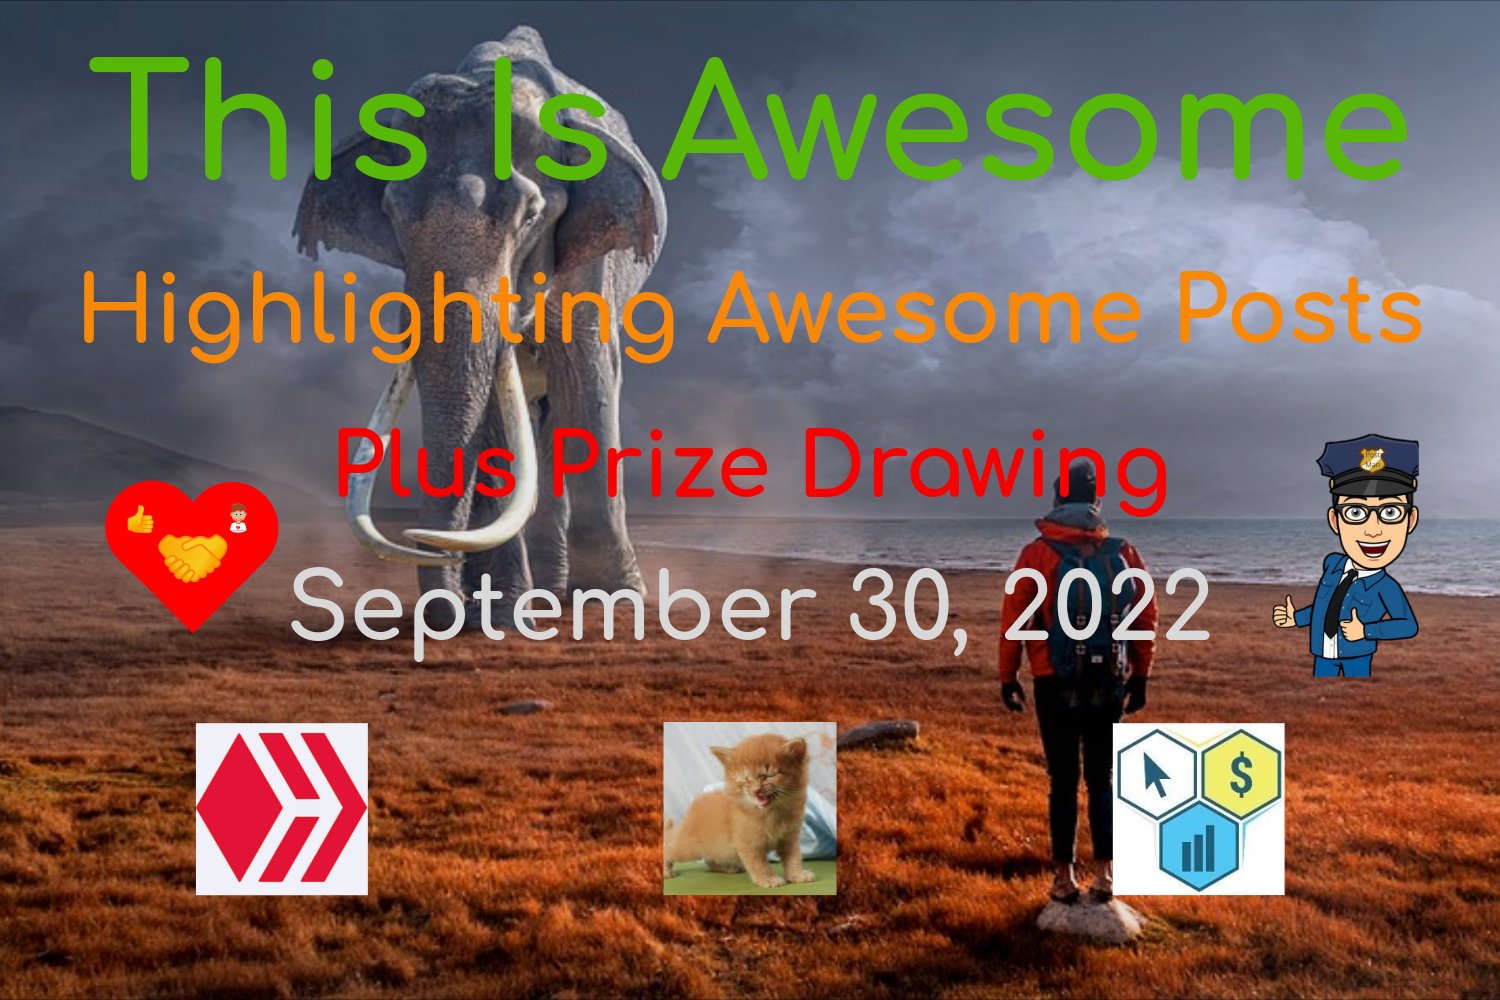 @thisisawesome/this-is-awesome-highlighting-awesome-posts-plus-prize-drawing-september-30-2022